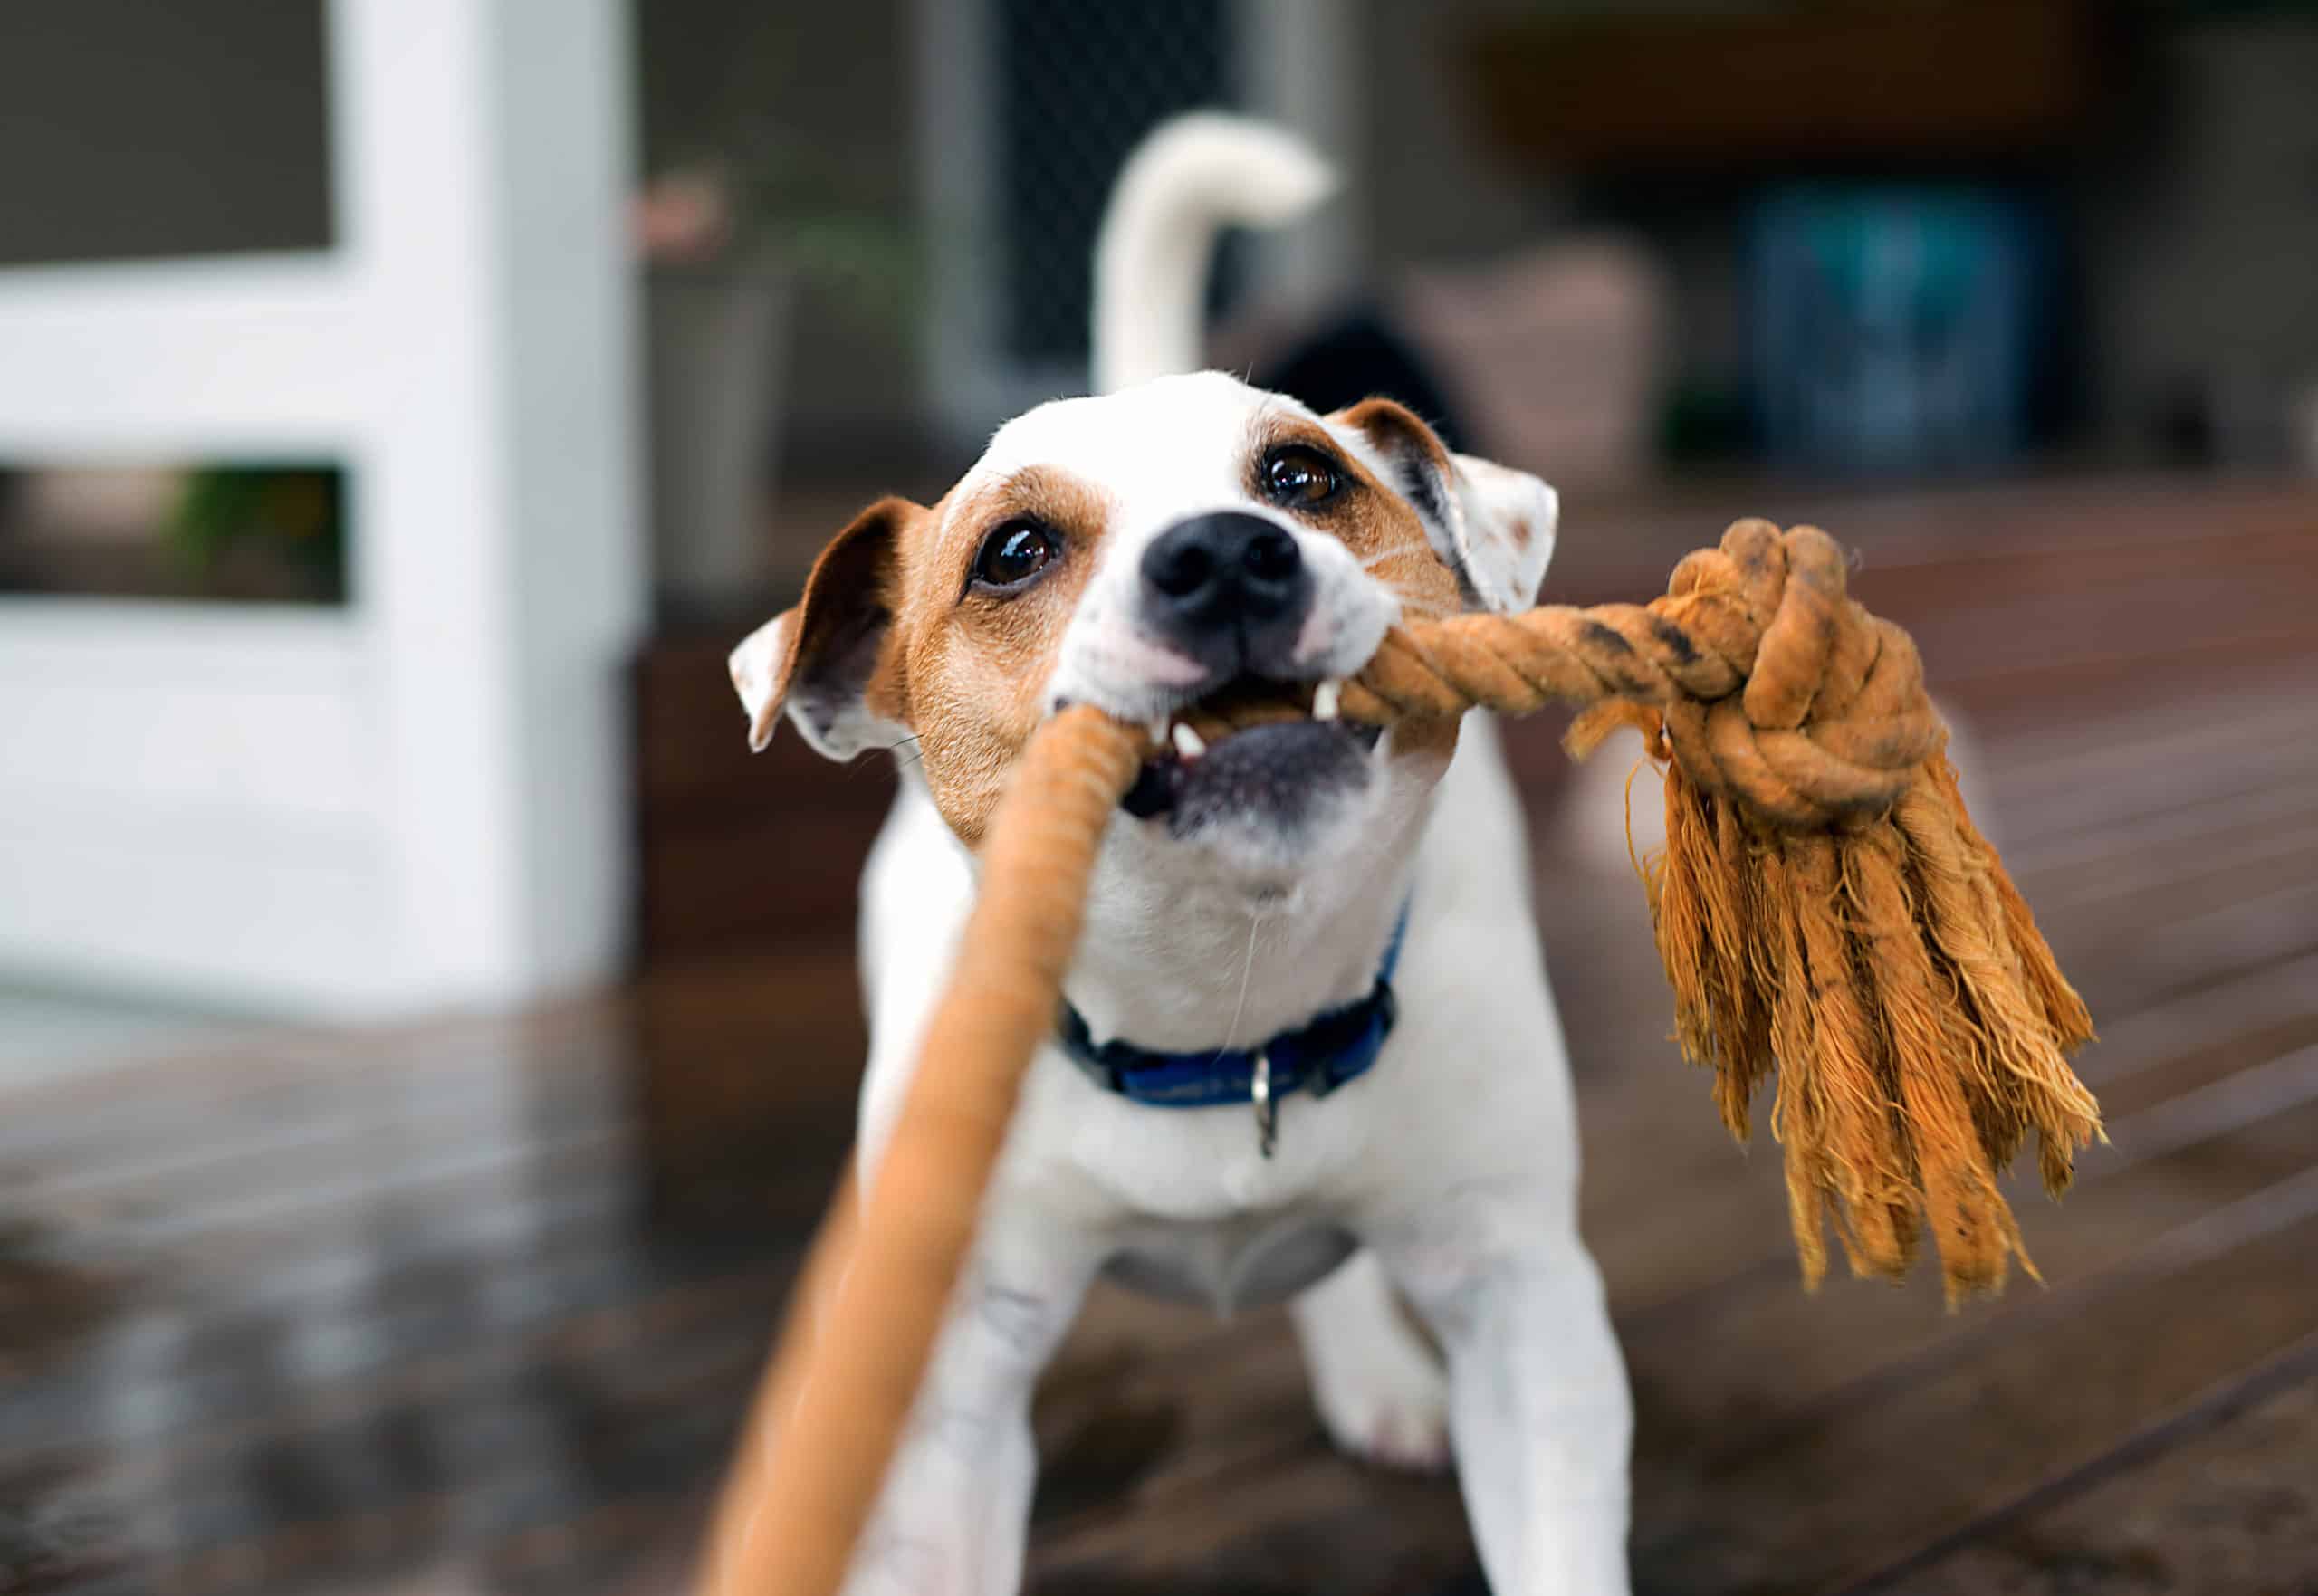 Should you let dogs win tug of war?